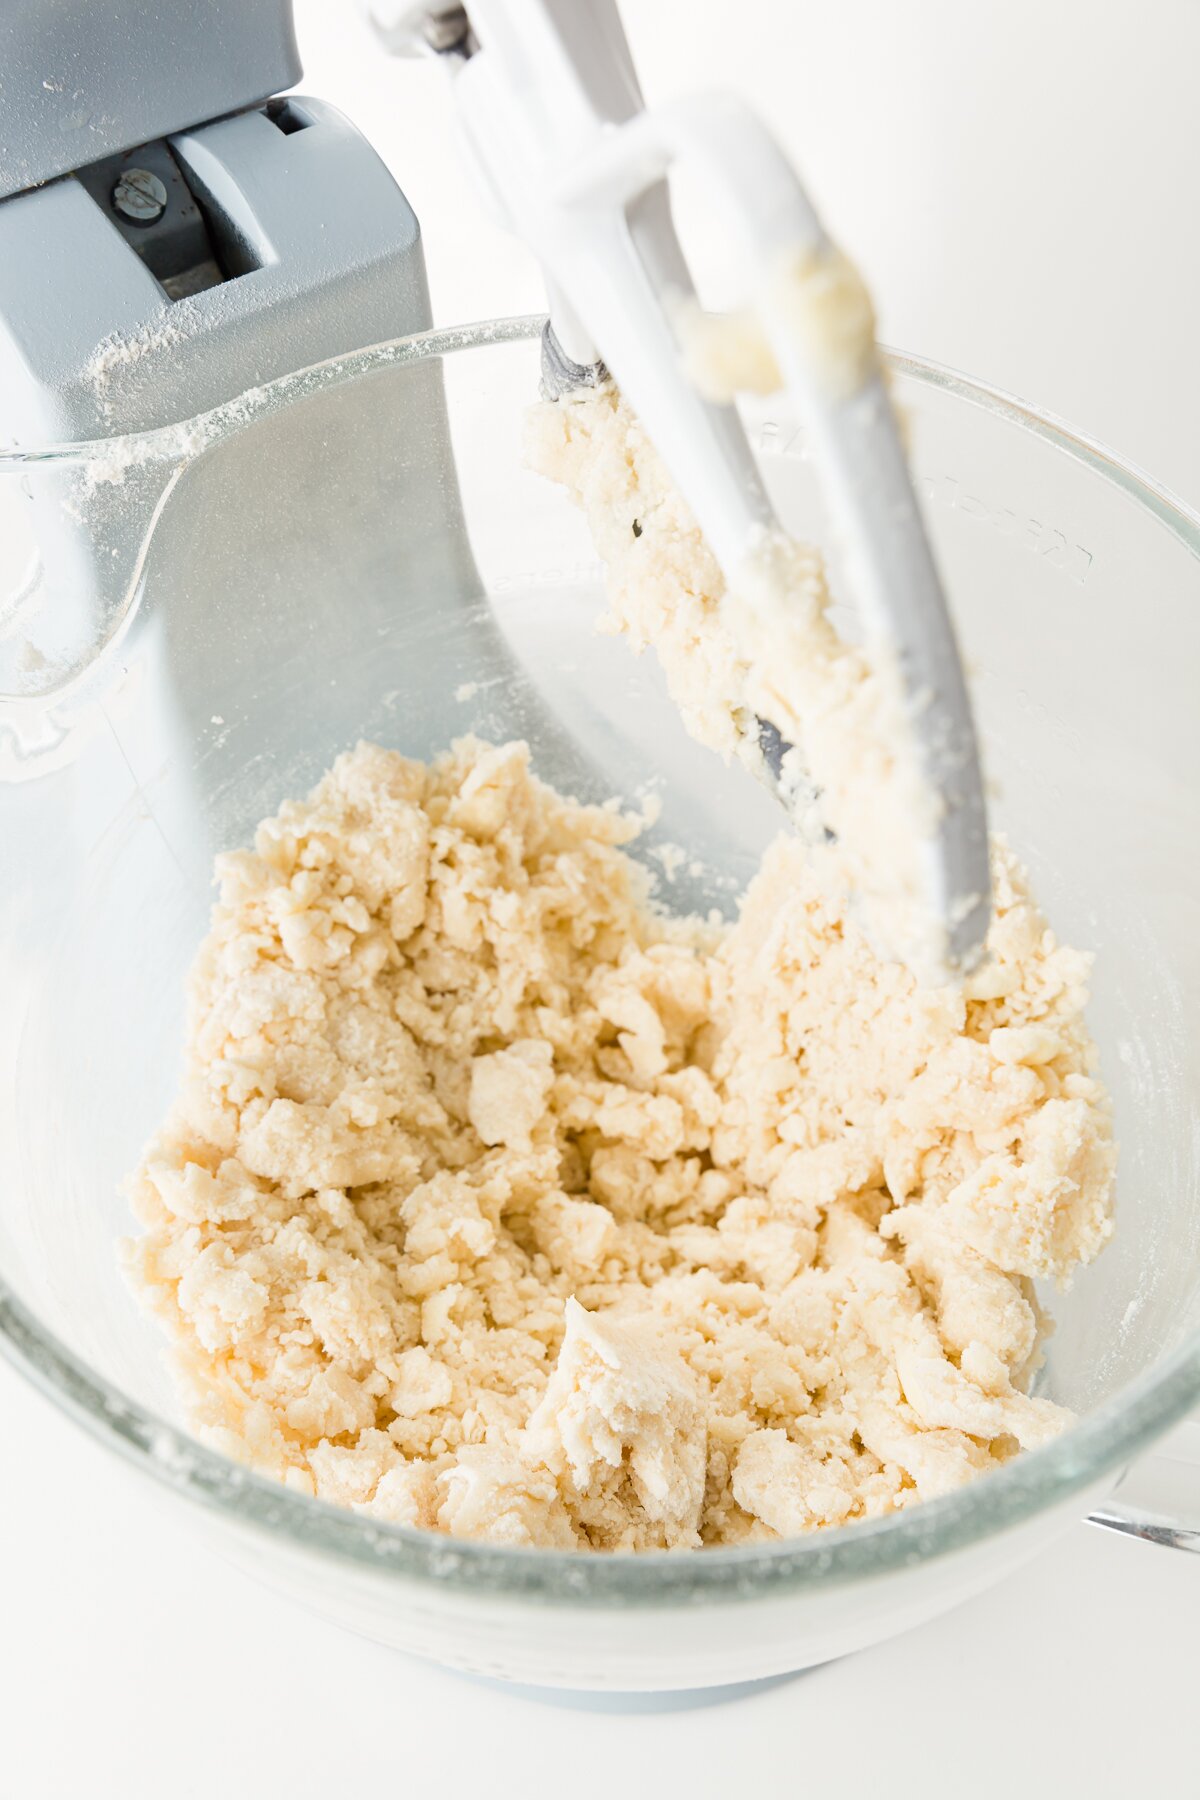 coconut milk thoroughly mixed with other ingredients in a stand mixer